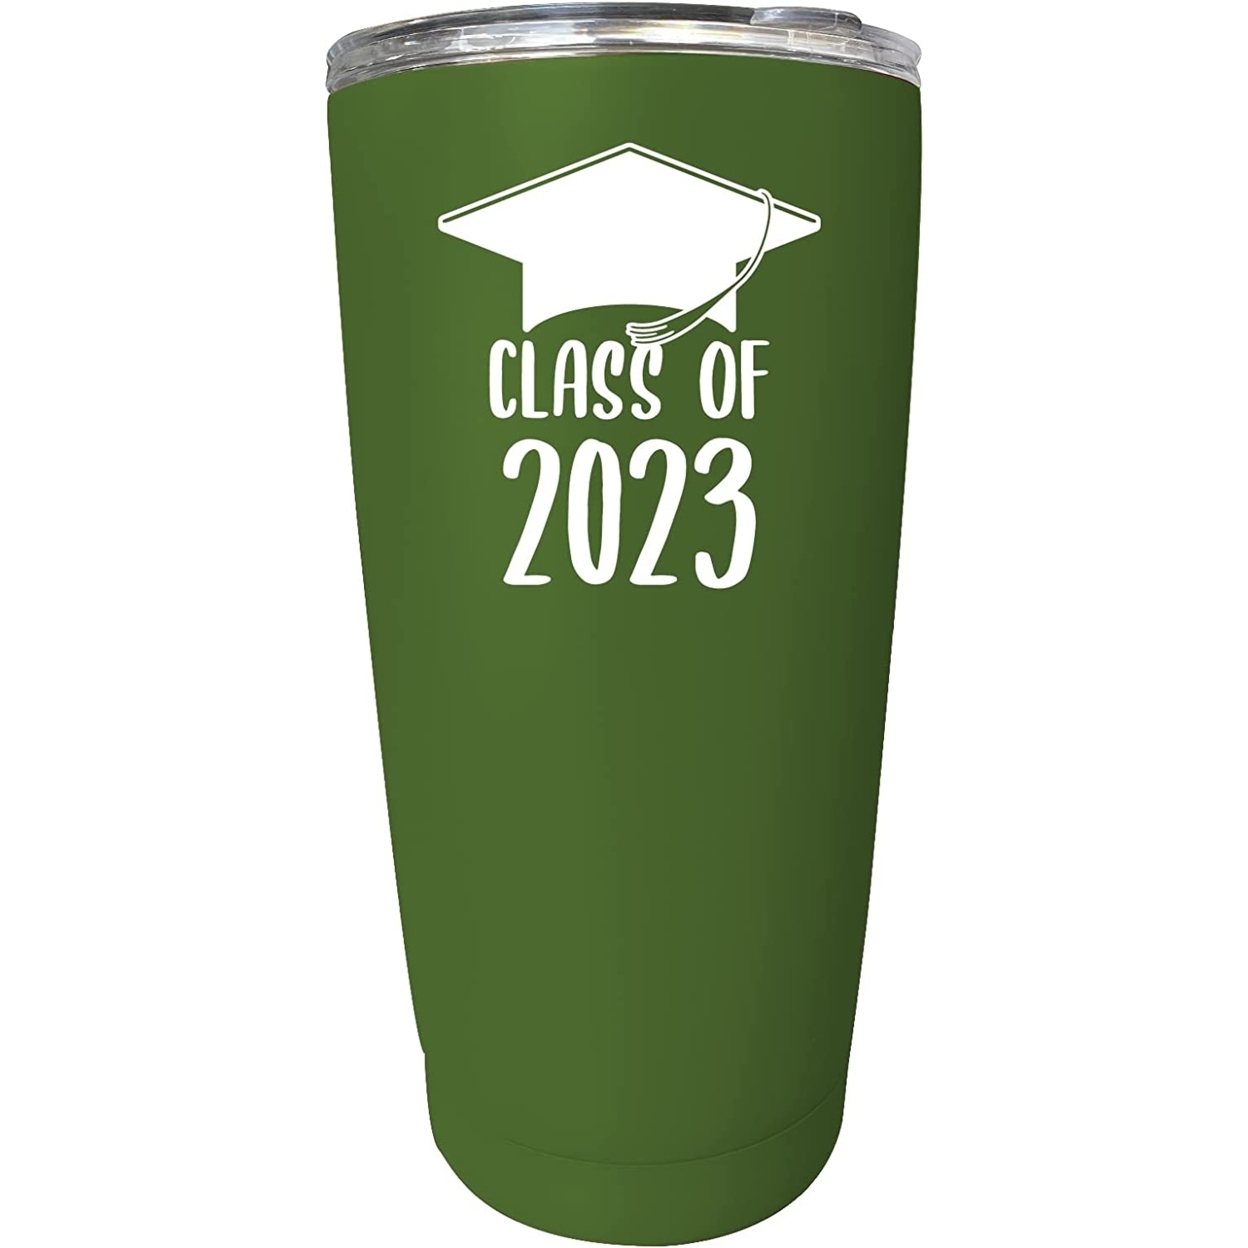 R And R Imports Class Of 2023 Graduation Senior Grad 16 Oz Stainless Steel Insulated Tumbler - Red